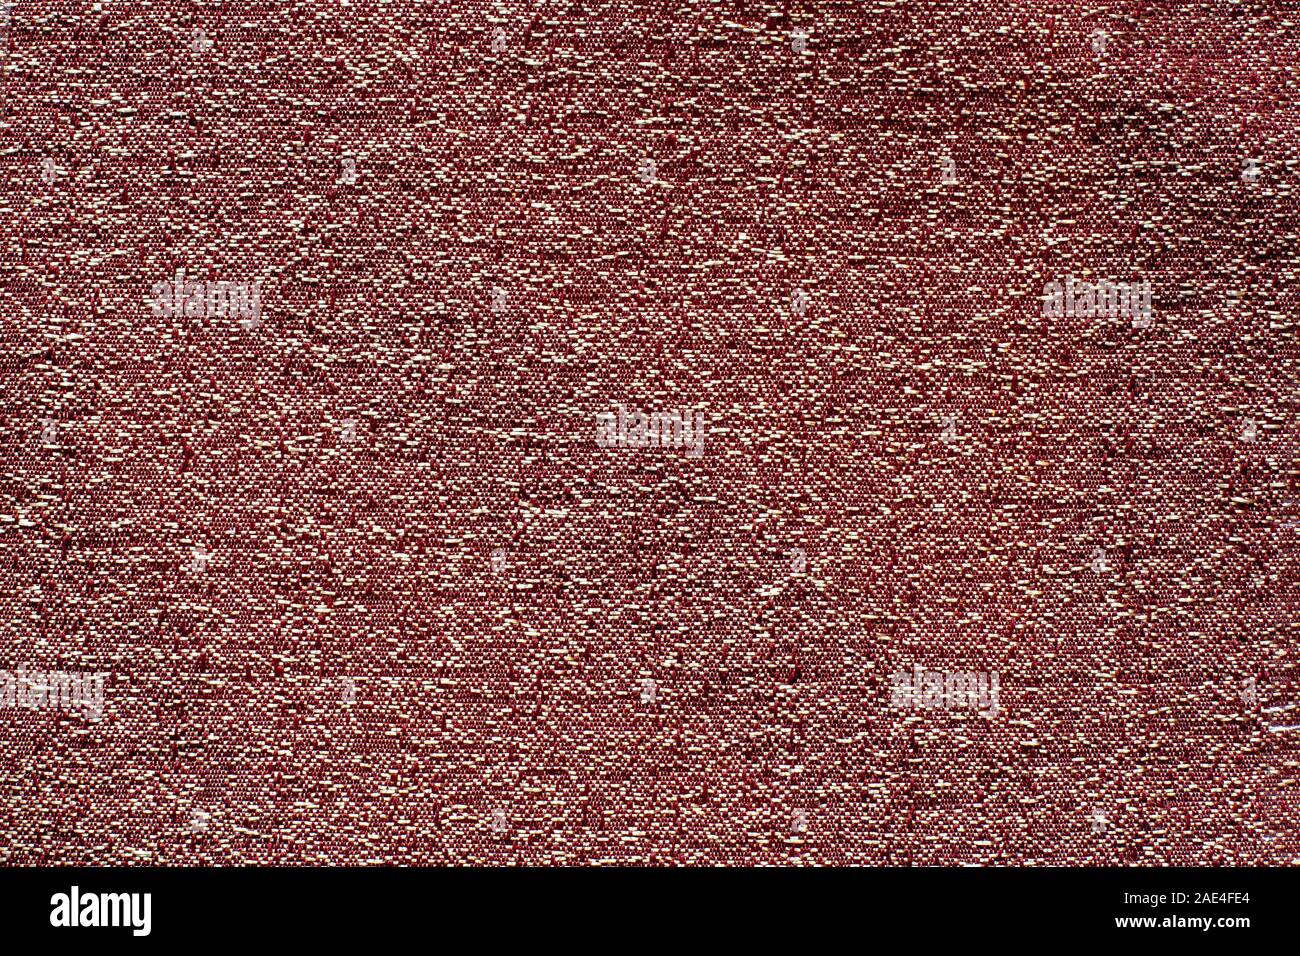 The texture of the fabric. Dark red with white spots, crumpled dense fabric. Copy space. Stock Photo